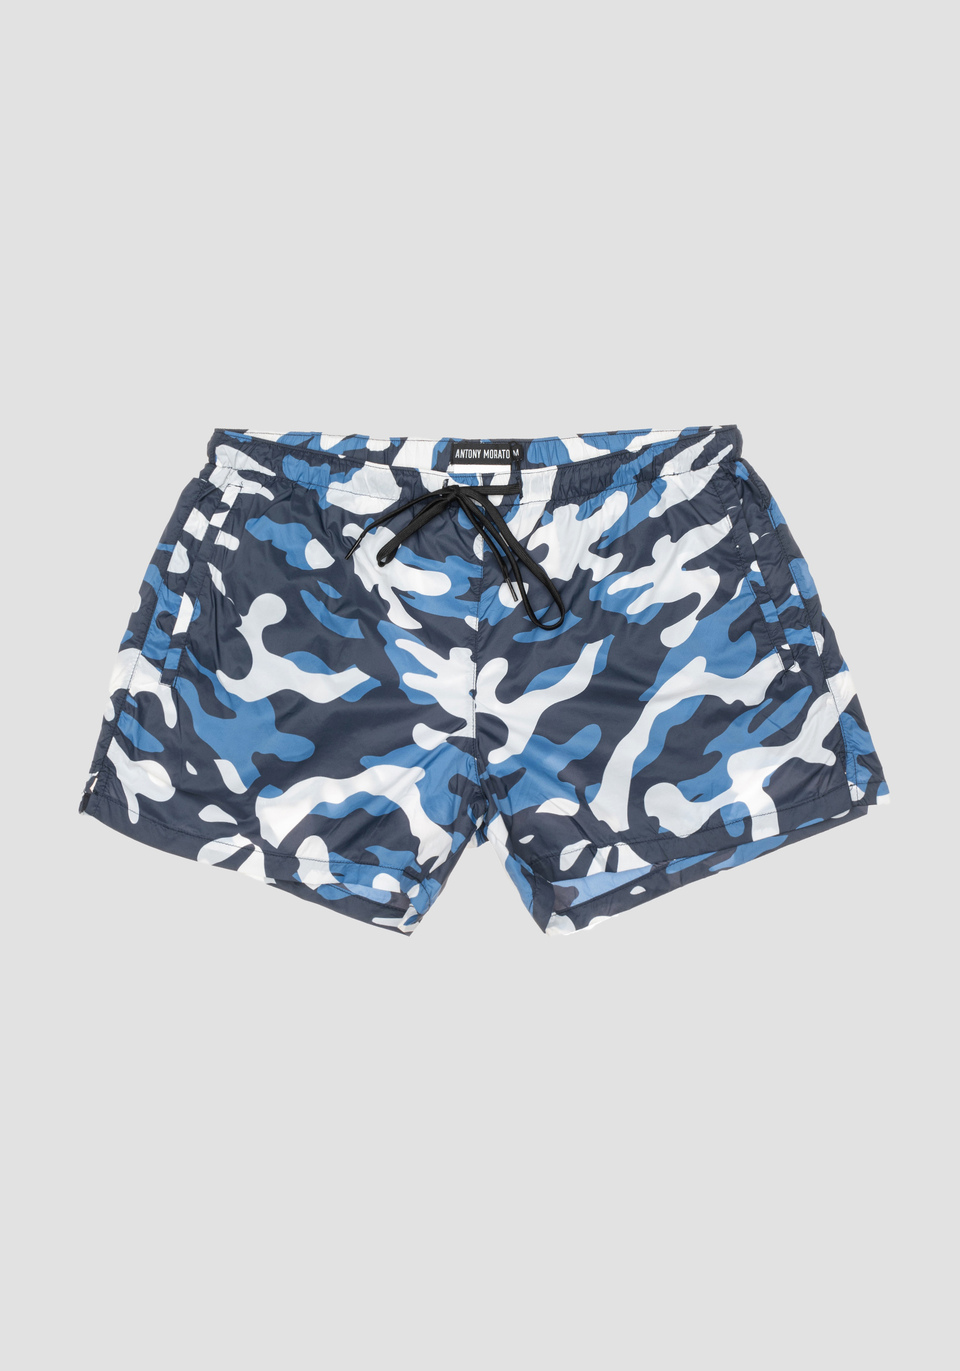 SLIM-FIT SWIMMING TRUNKS WITH CAMOUFLAGE PRINT - Antony Morato Online Shop